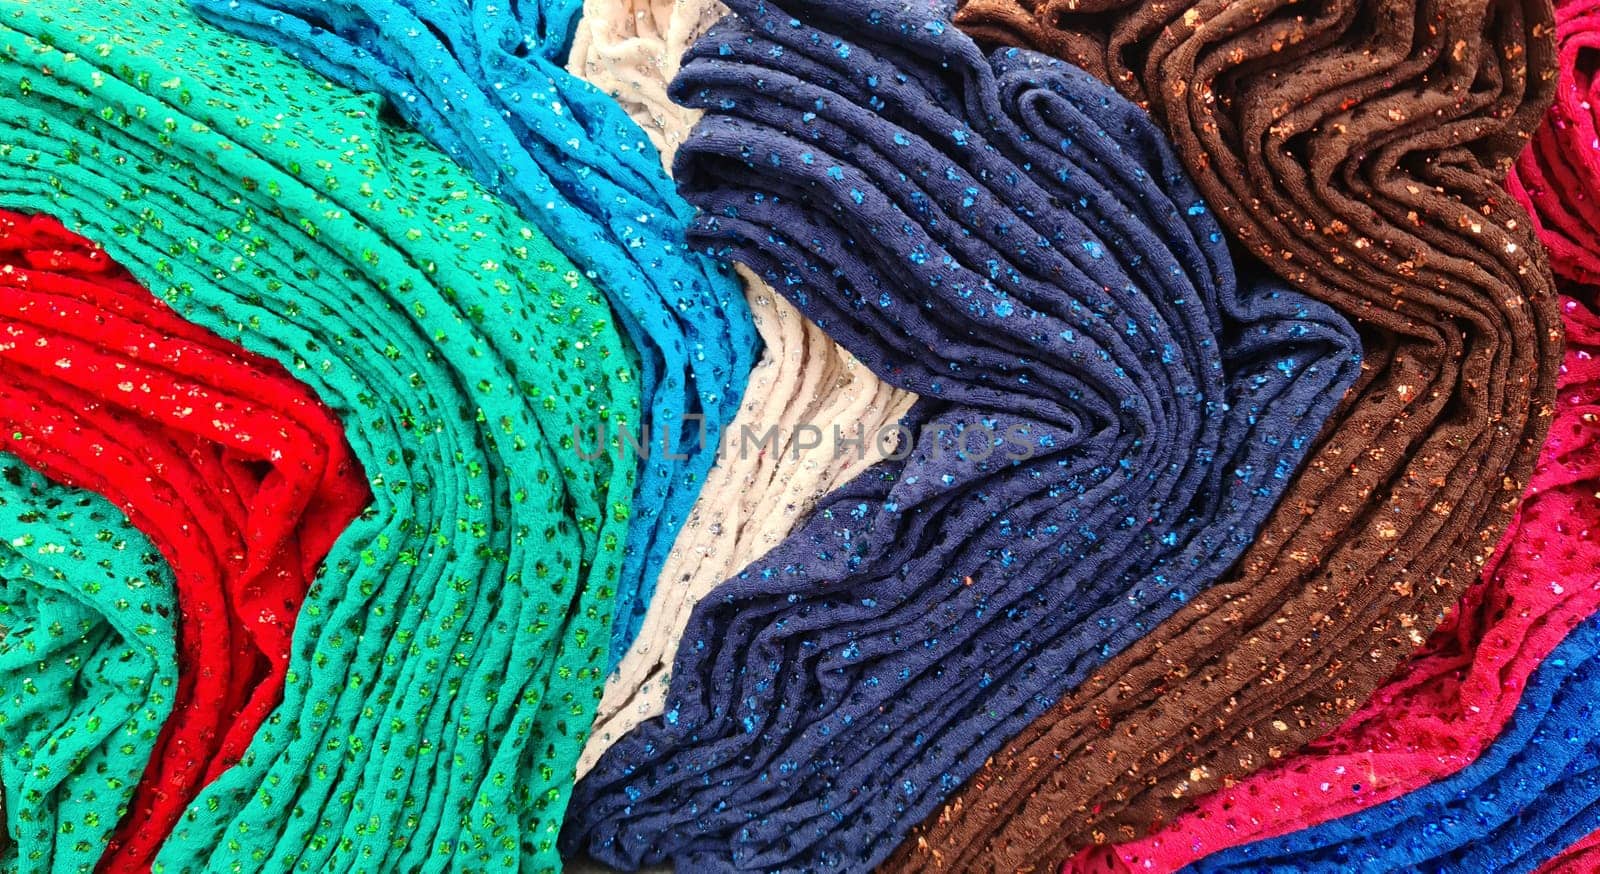 Samples of cloth and fabrics in different colors at a fabrics market by MP_foto71